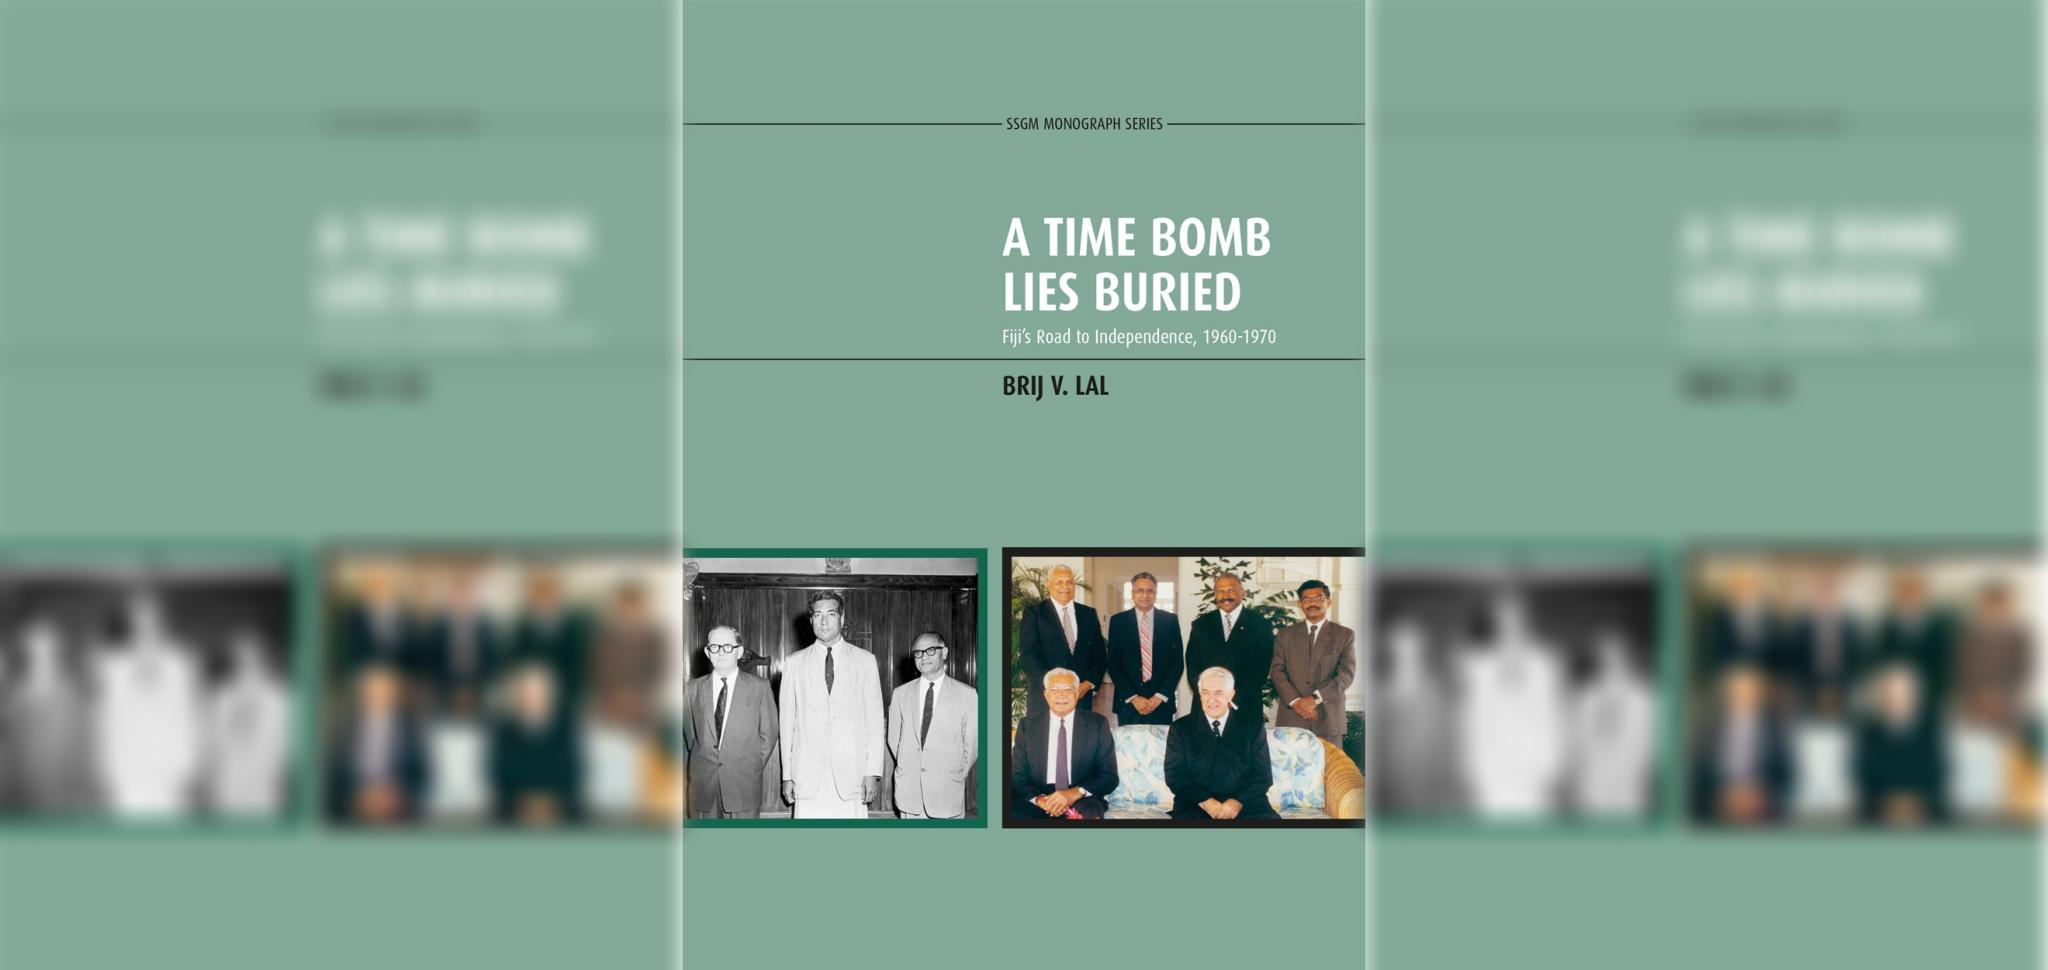 A Time Bomb Lies Buried Fiji’s Road to Independence, 1960-1970